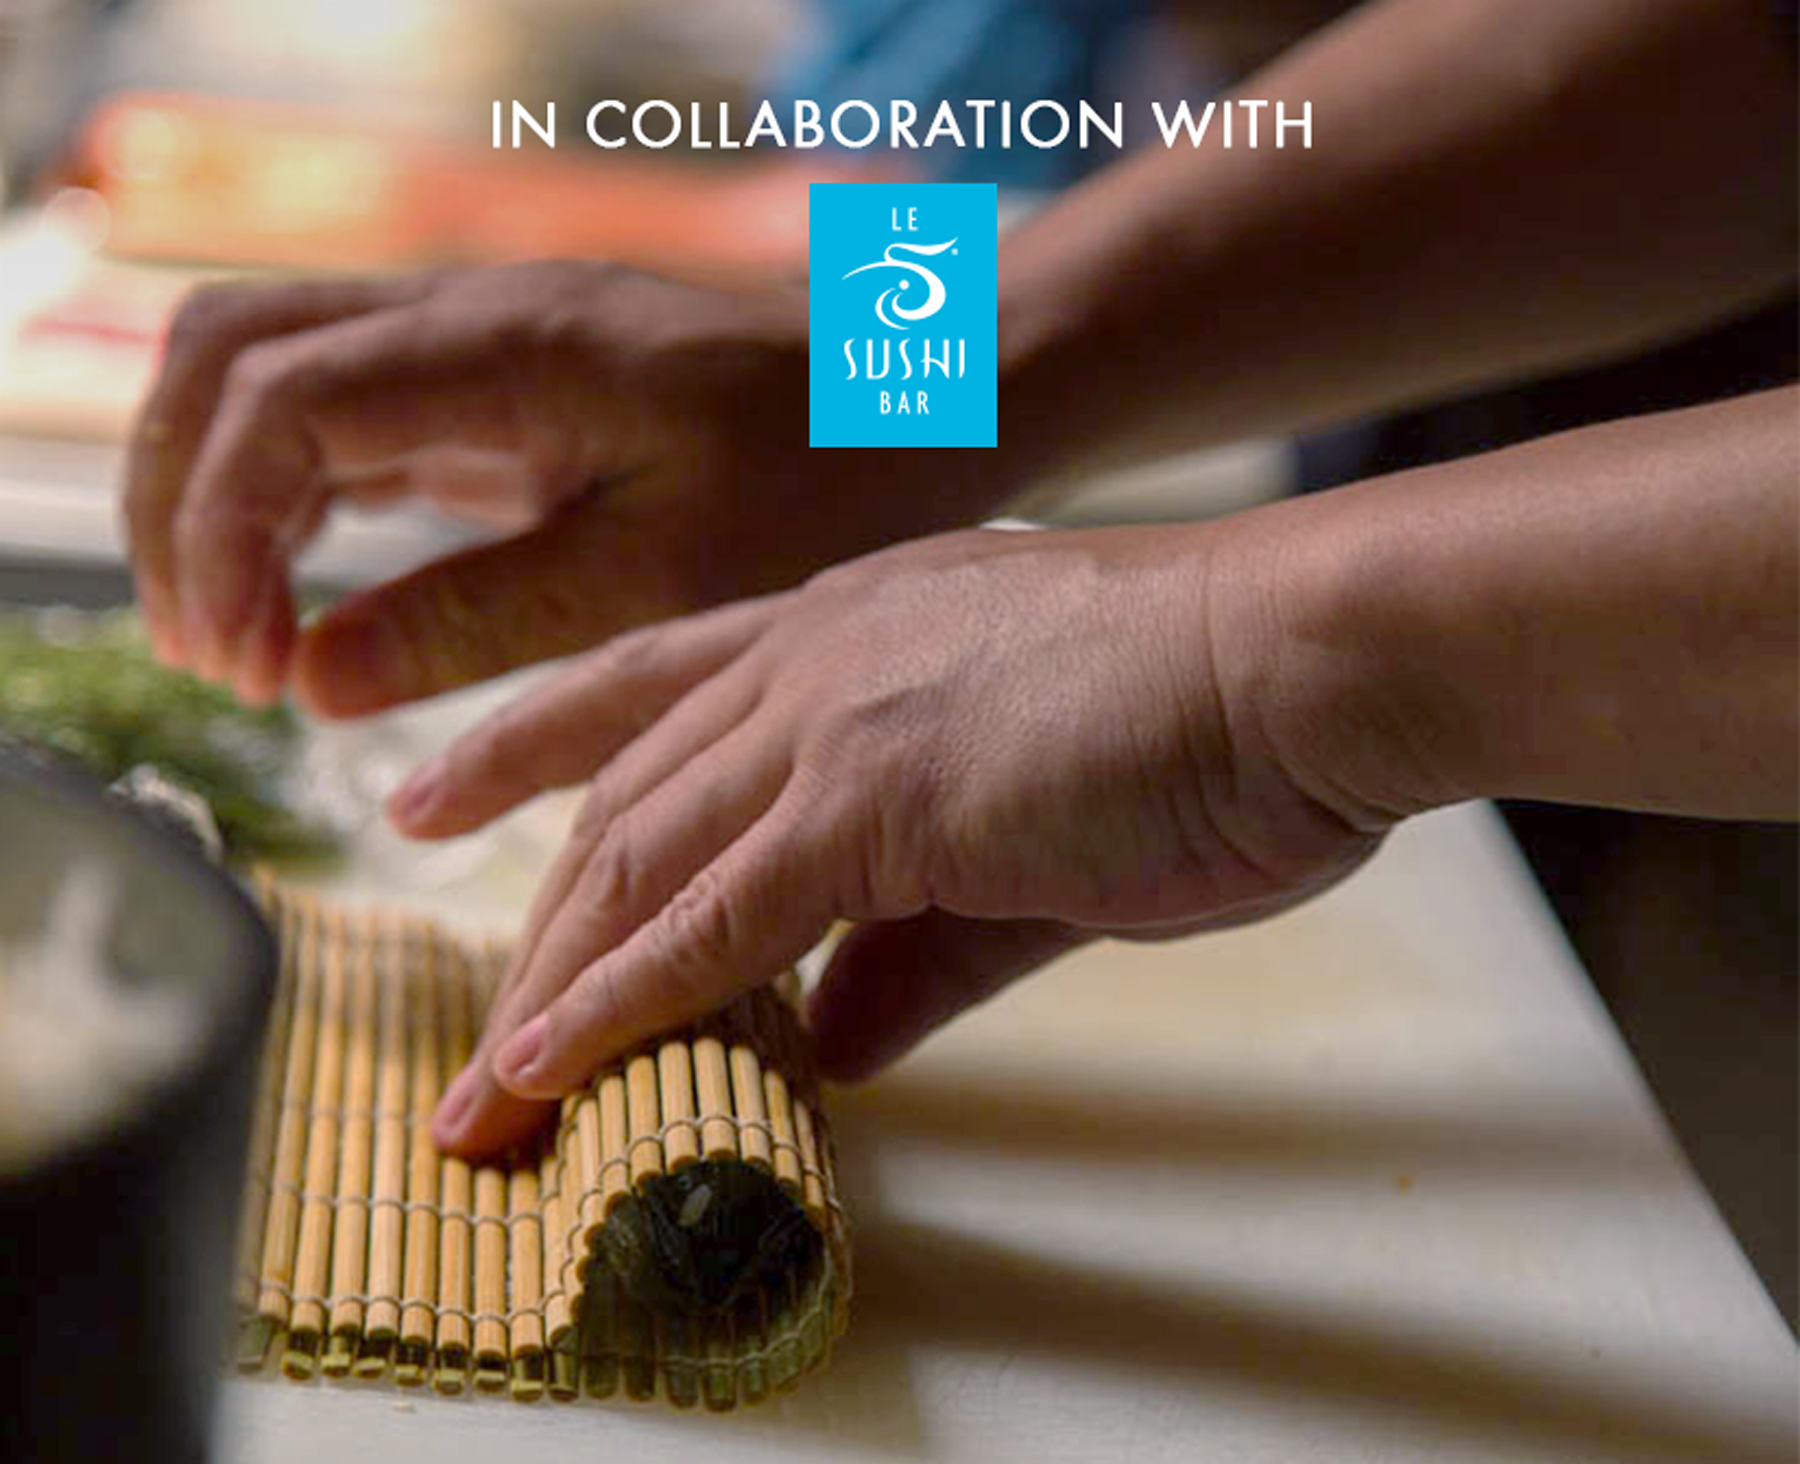 Let's roll sushi in collaboration with Le Sushi Bar